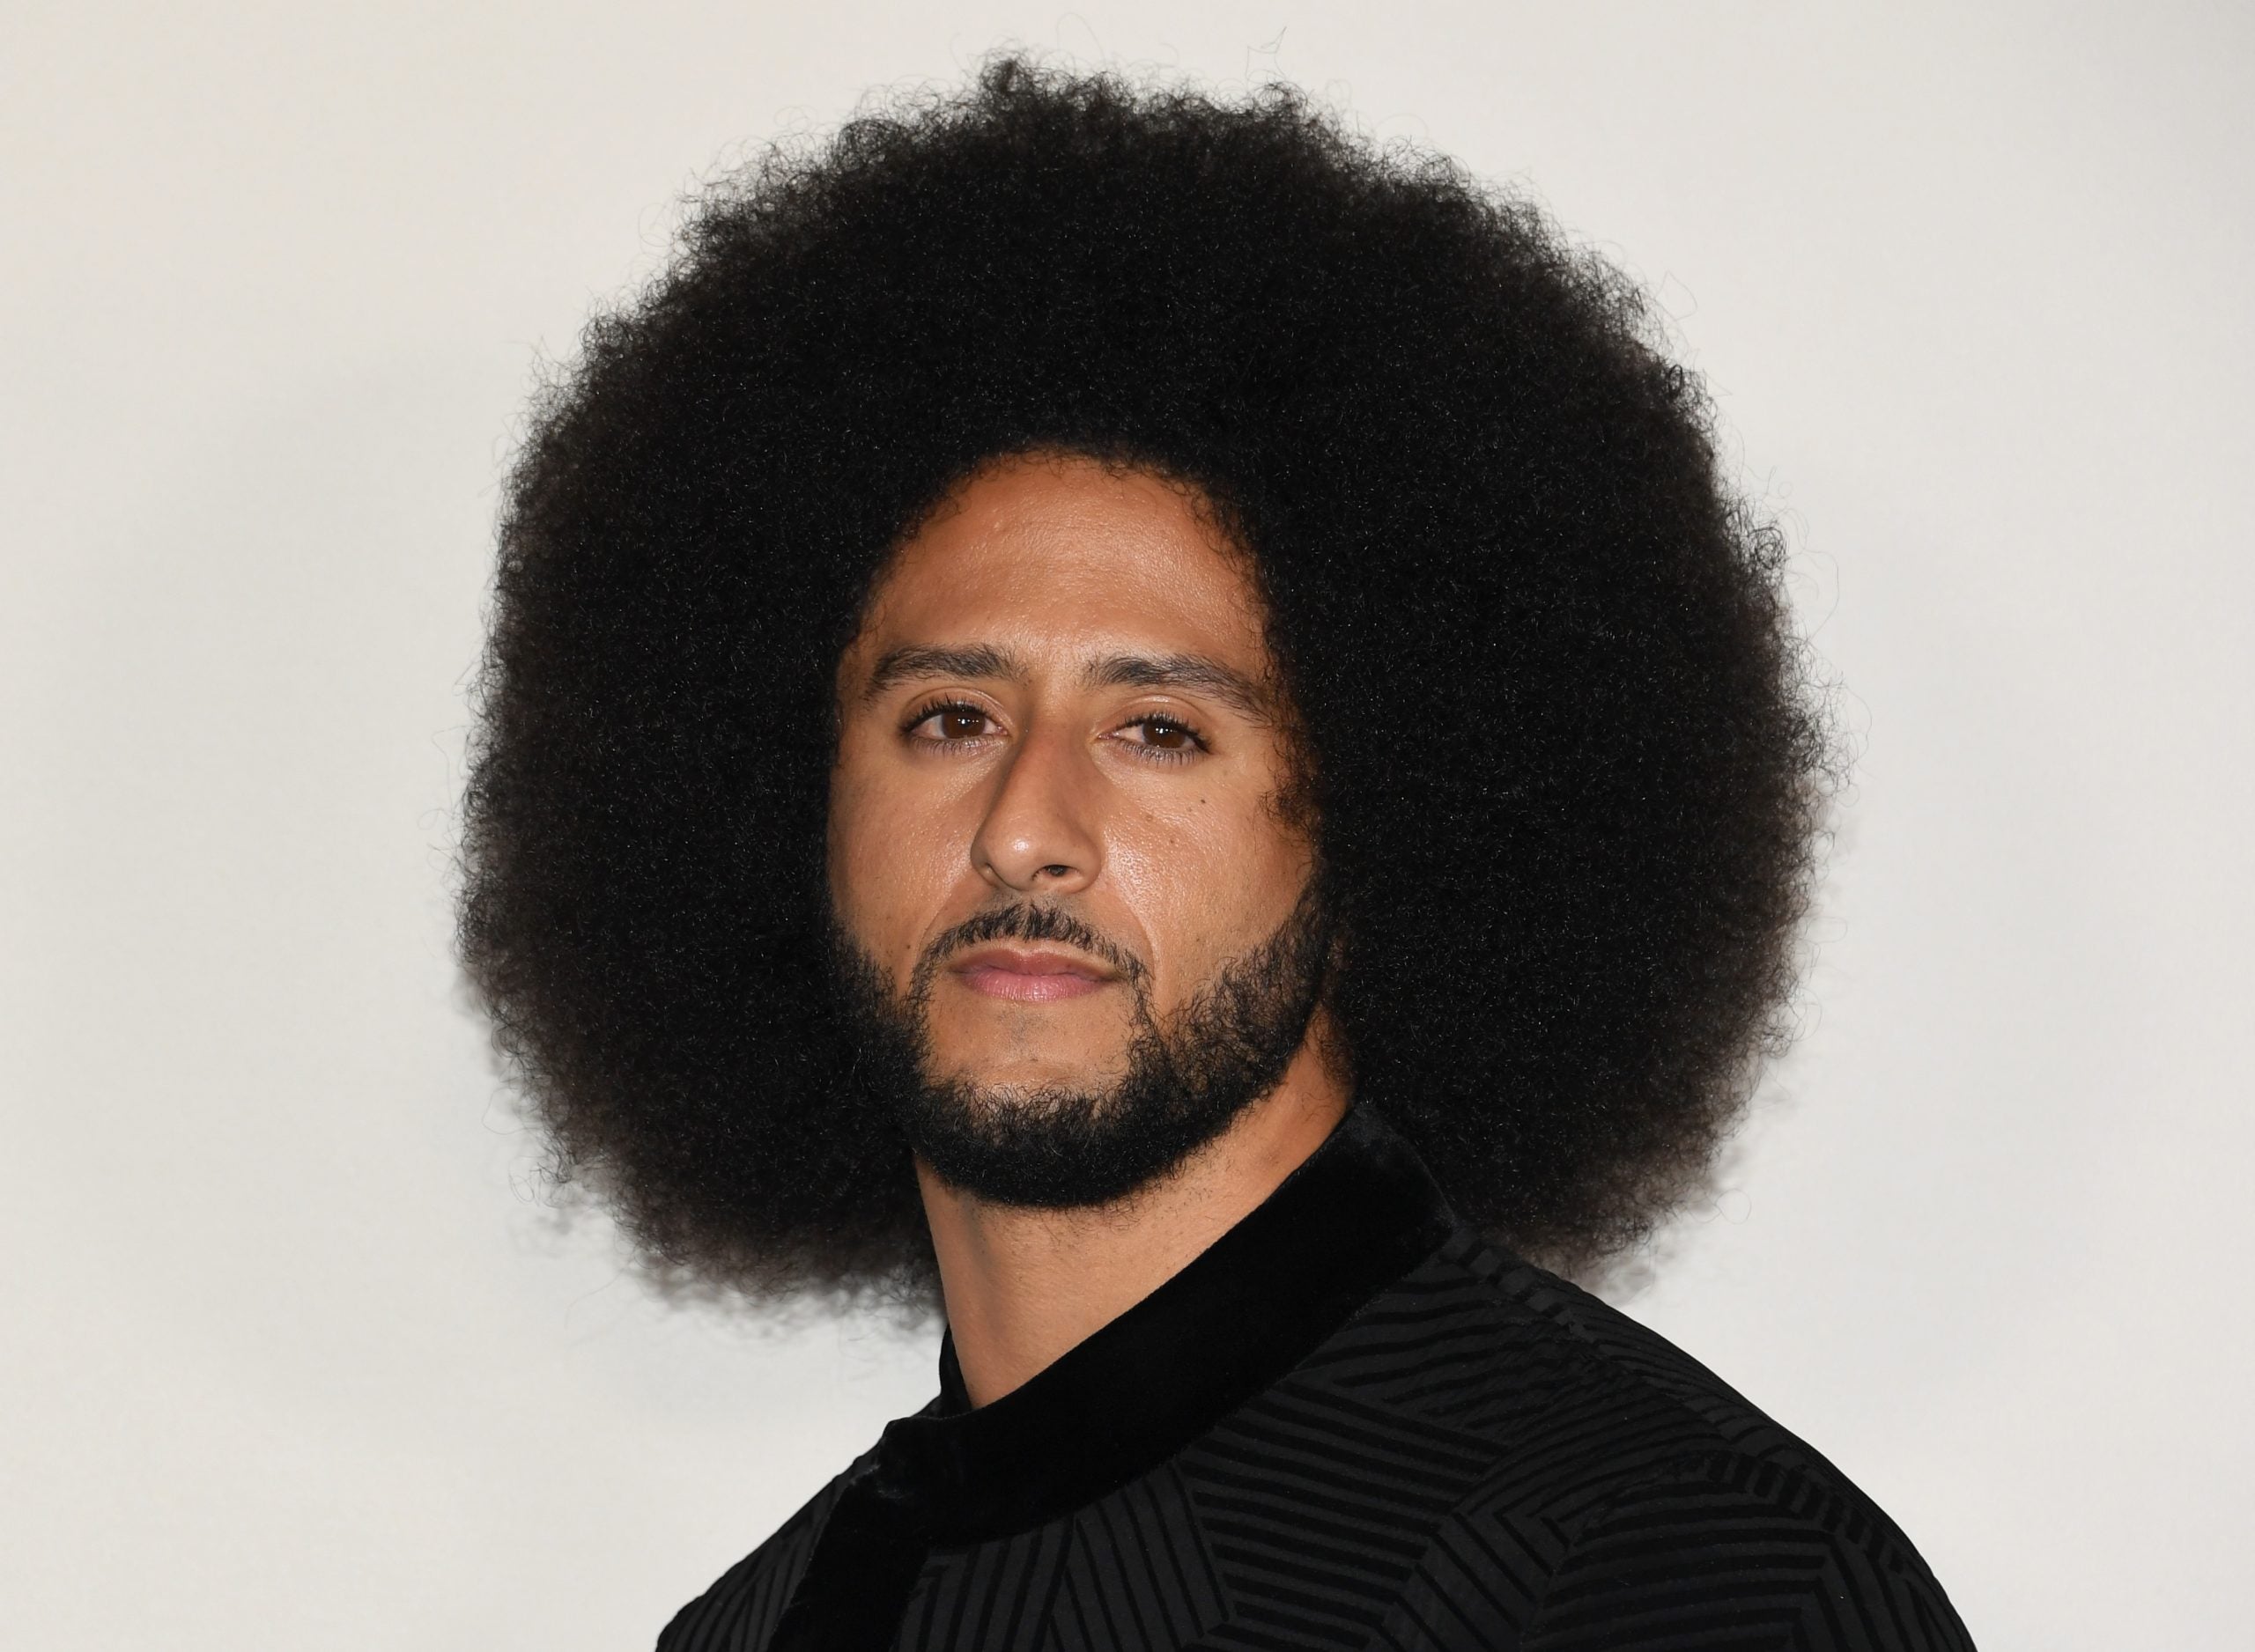 Colin Kaepernick Launches “The Autopsy Initiative” to Families Who Experienced “Police-Related” Deaths